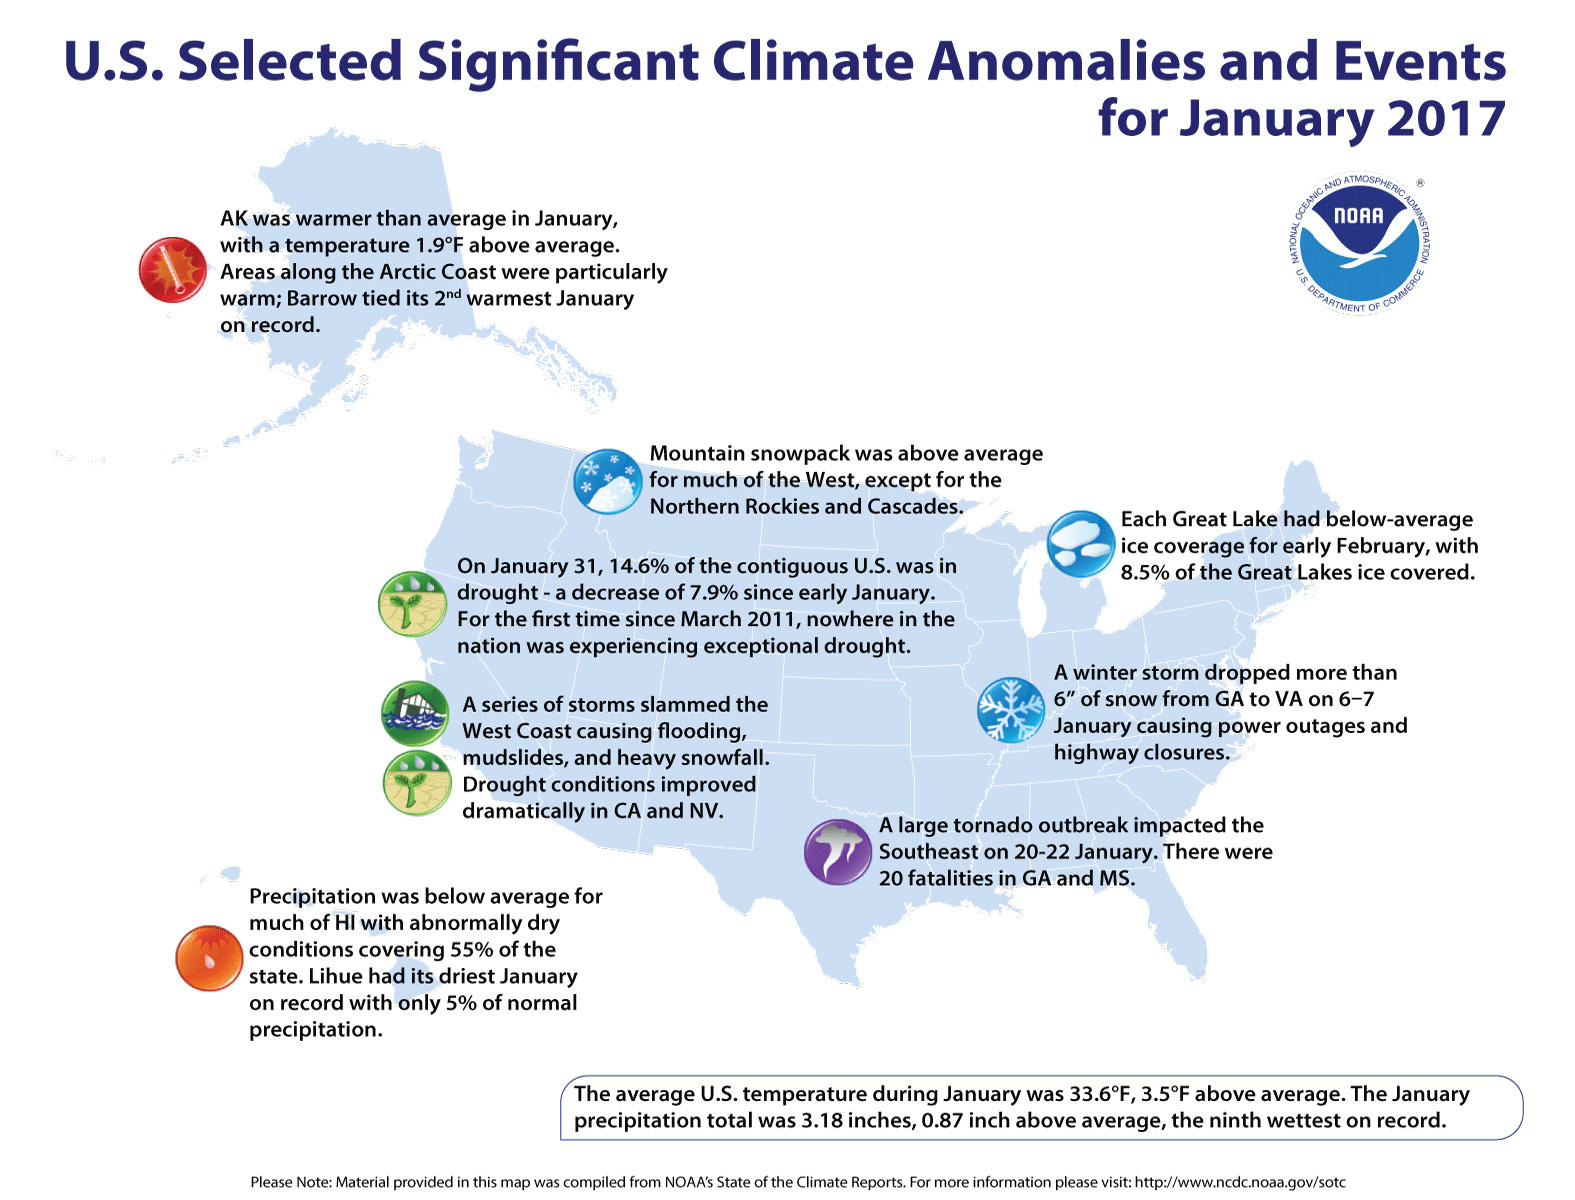 Notable climate events that occurred across the U.S. in January 2017.